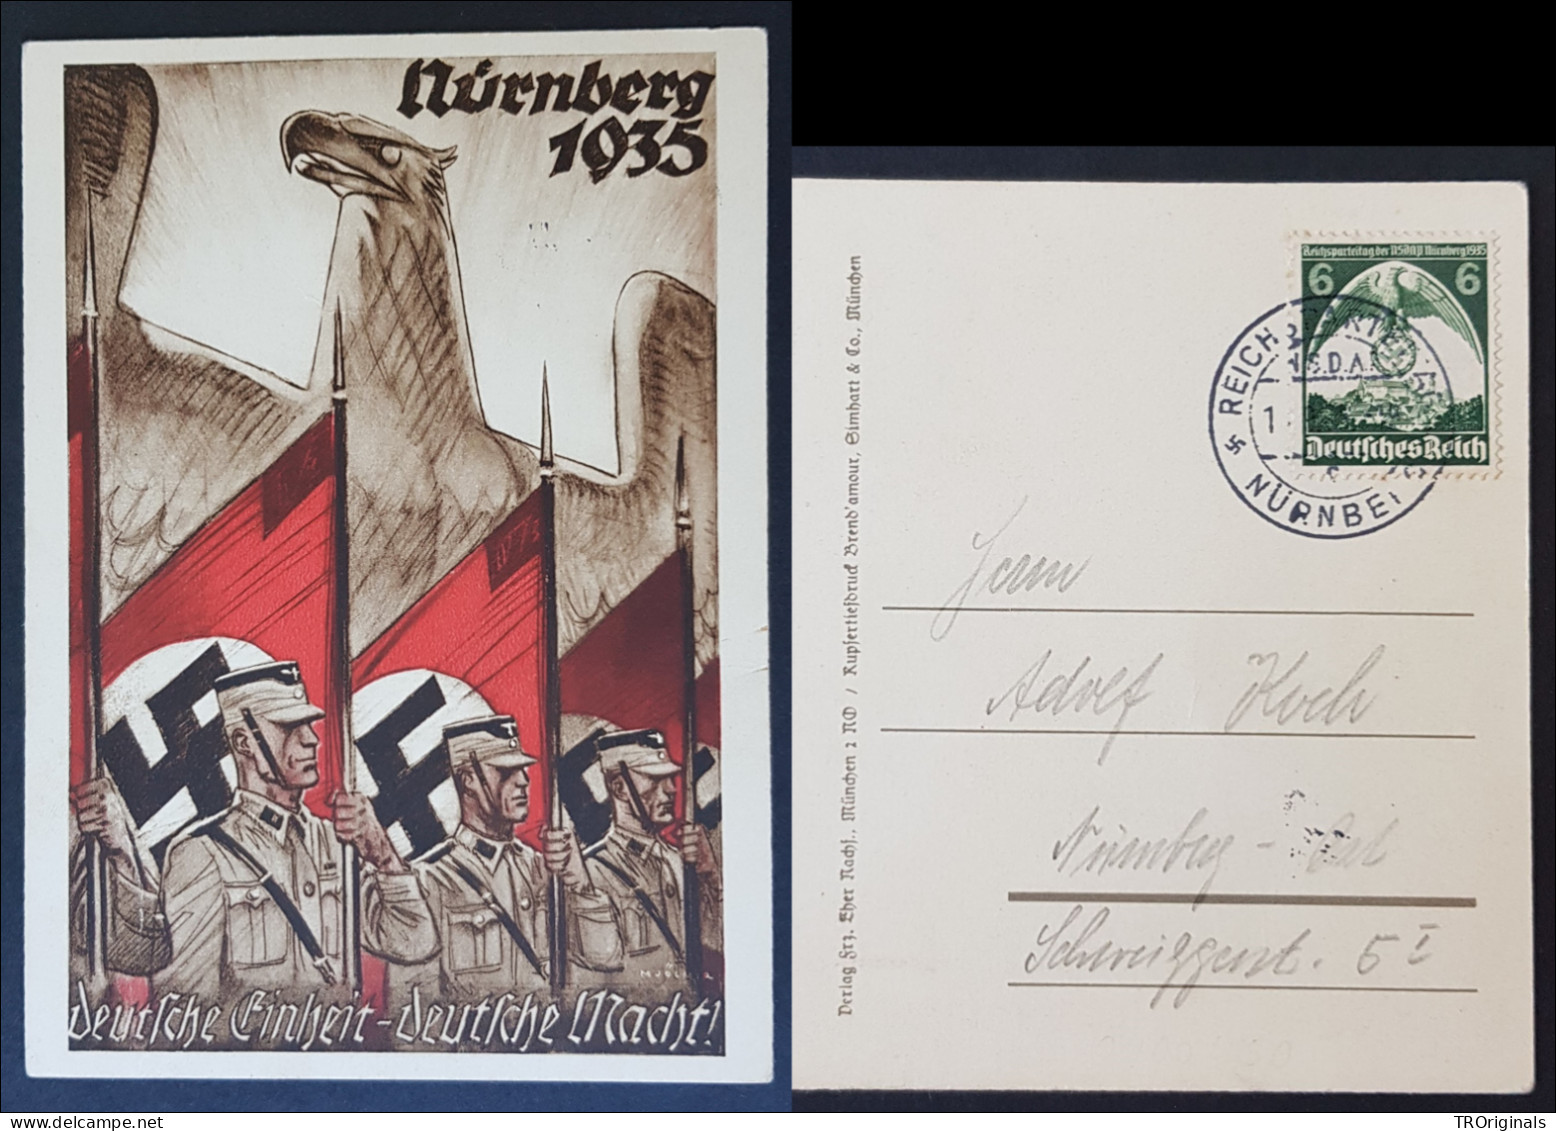 GERMANY THIRD REICH ORIGINAL POSTCARD NÜRNBERG RALLY 1935 IMPERIAL EAGLE - Guerre 1939-45